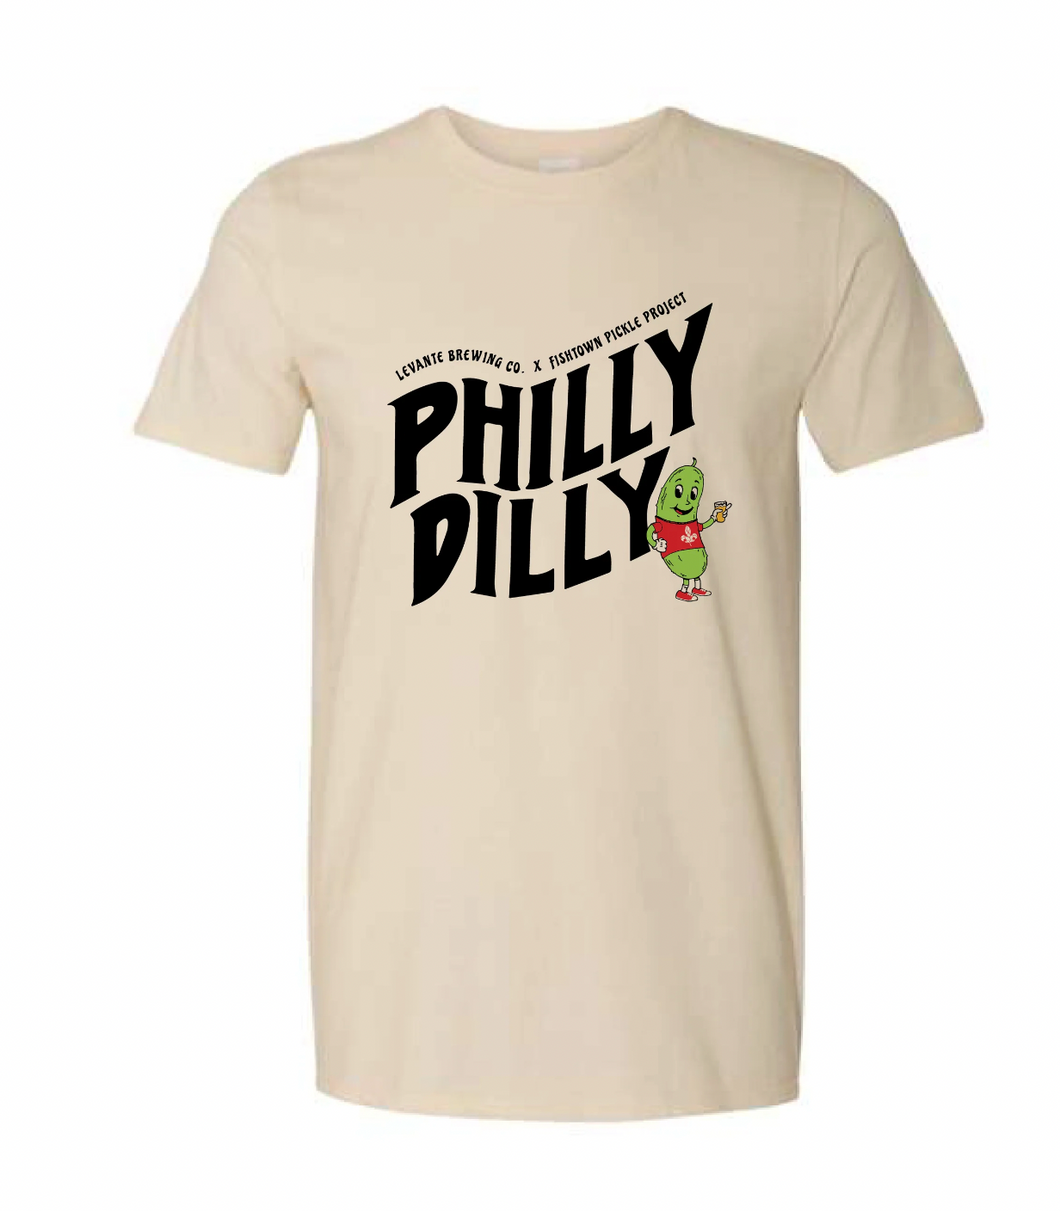 Levante Brewing Co. x Fishtown Pickle Project Philly Dilly Tee